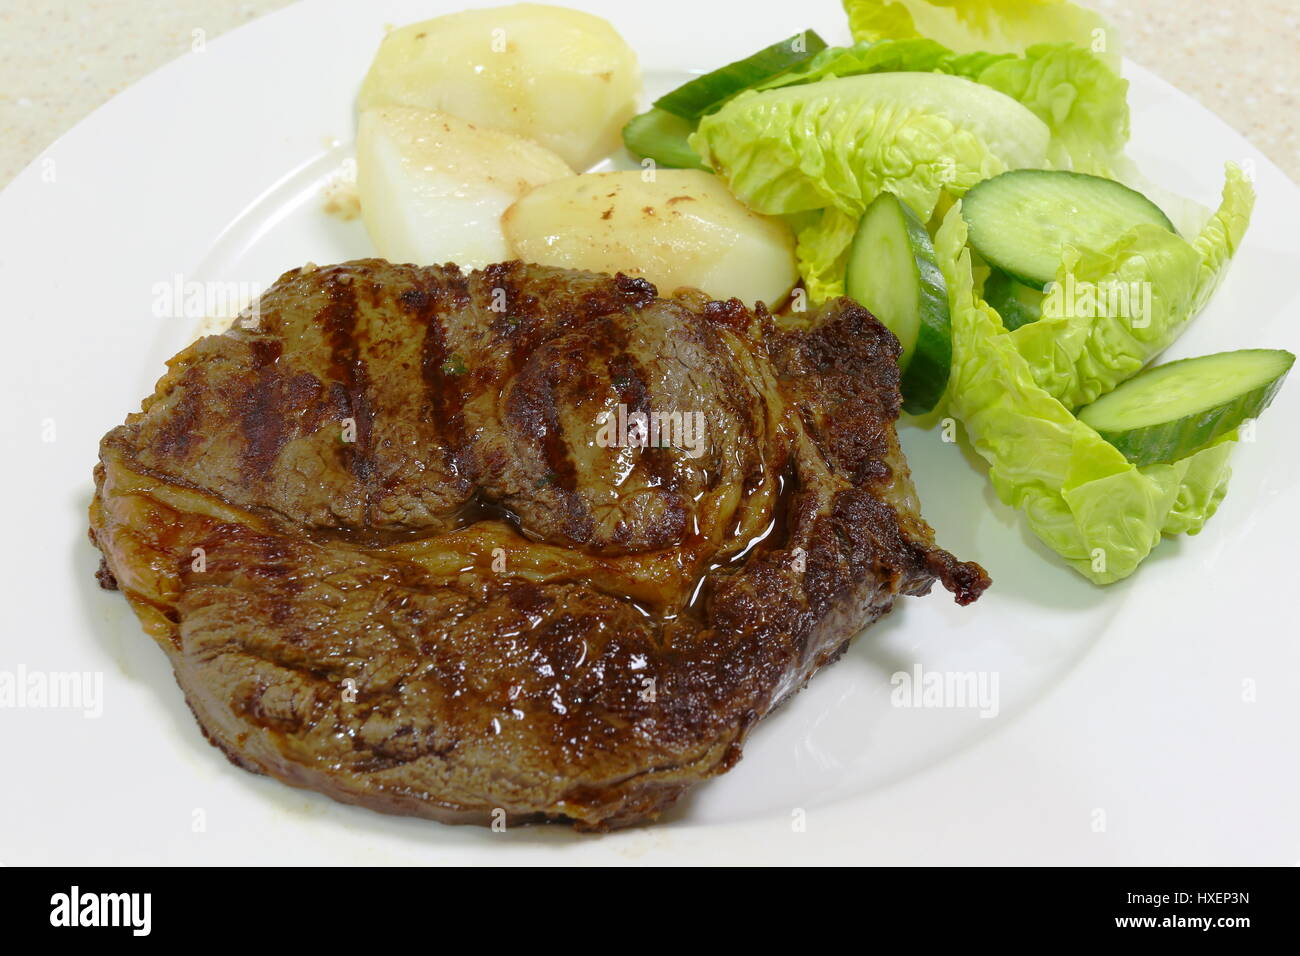 A meal of grilled or broiled ribeye steak served with boiled potato and a green salad Stock Photo